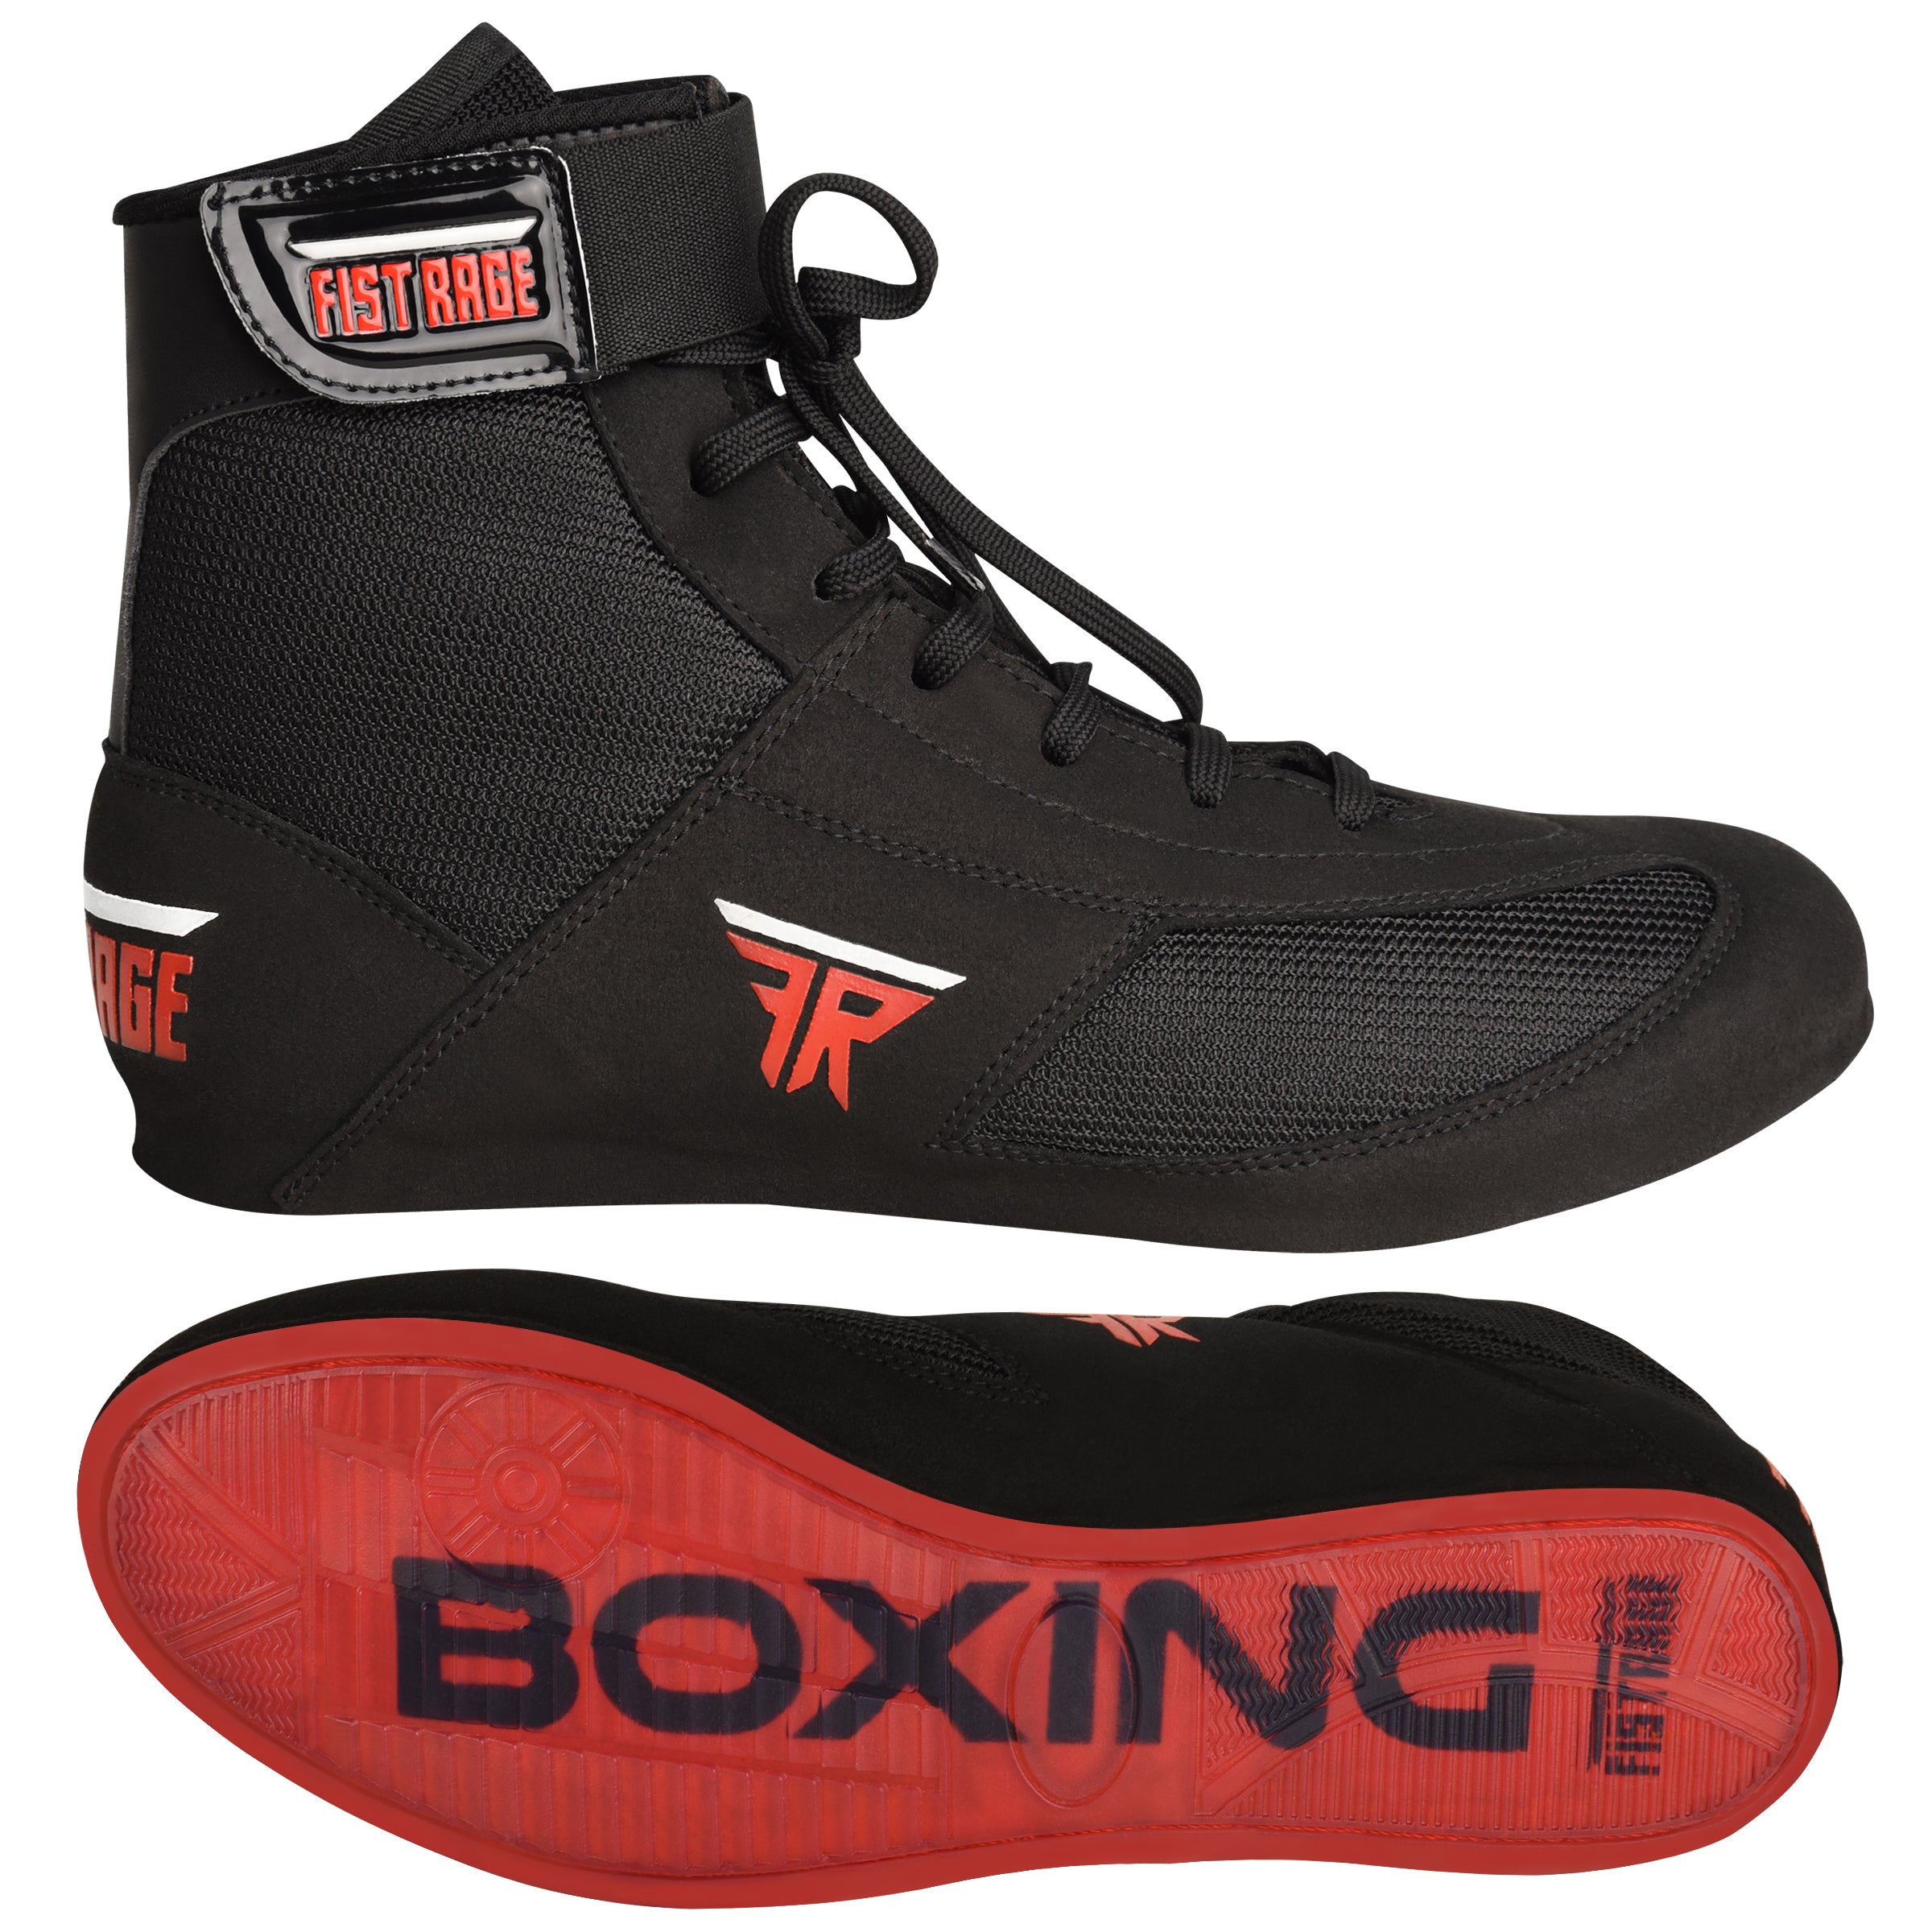 LOW TOP BOXING SHOES - image 1 of 8